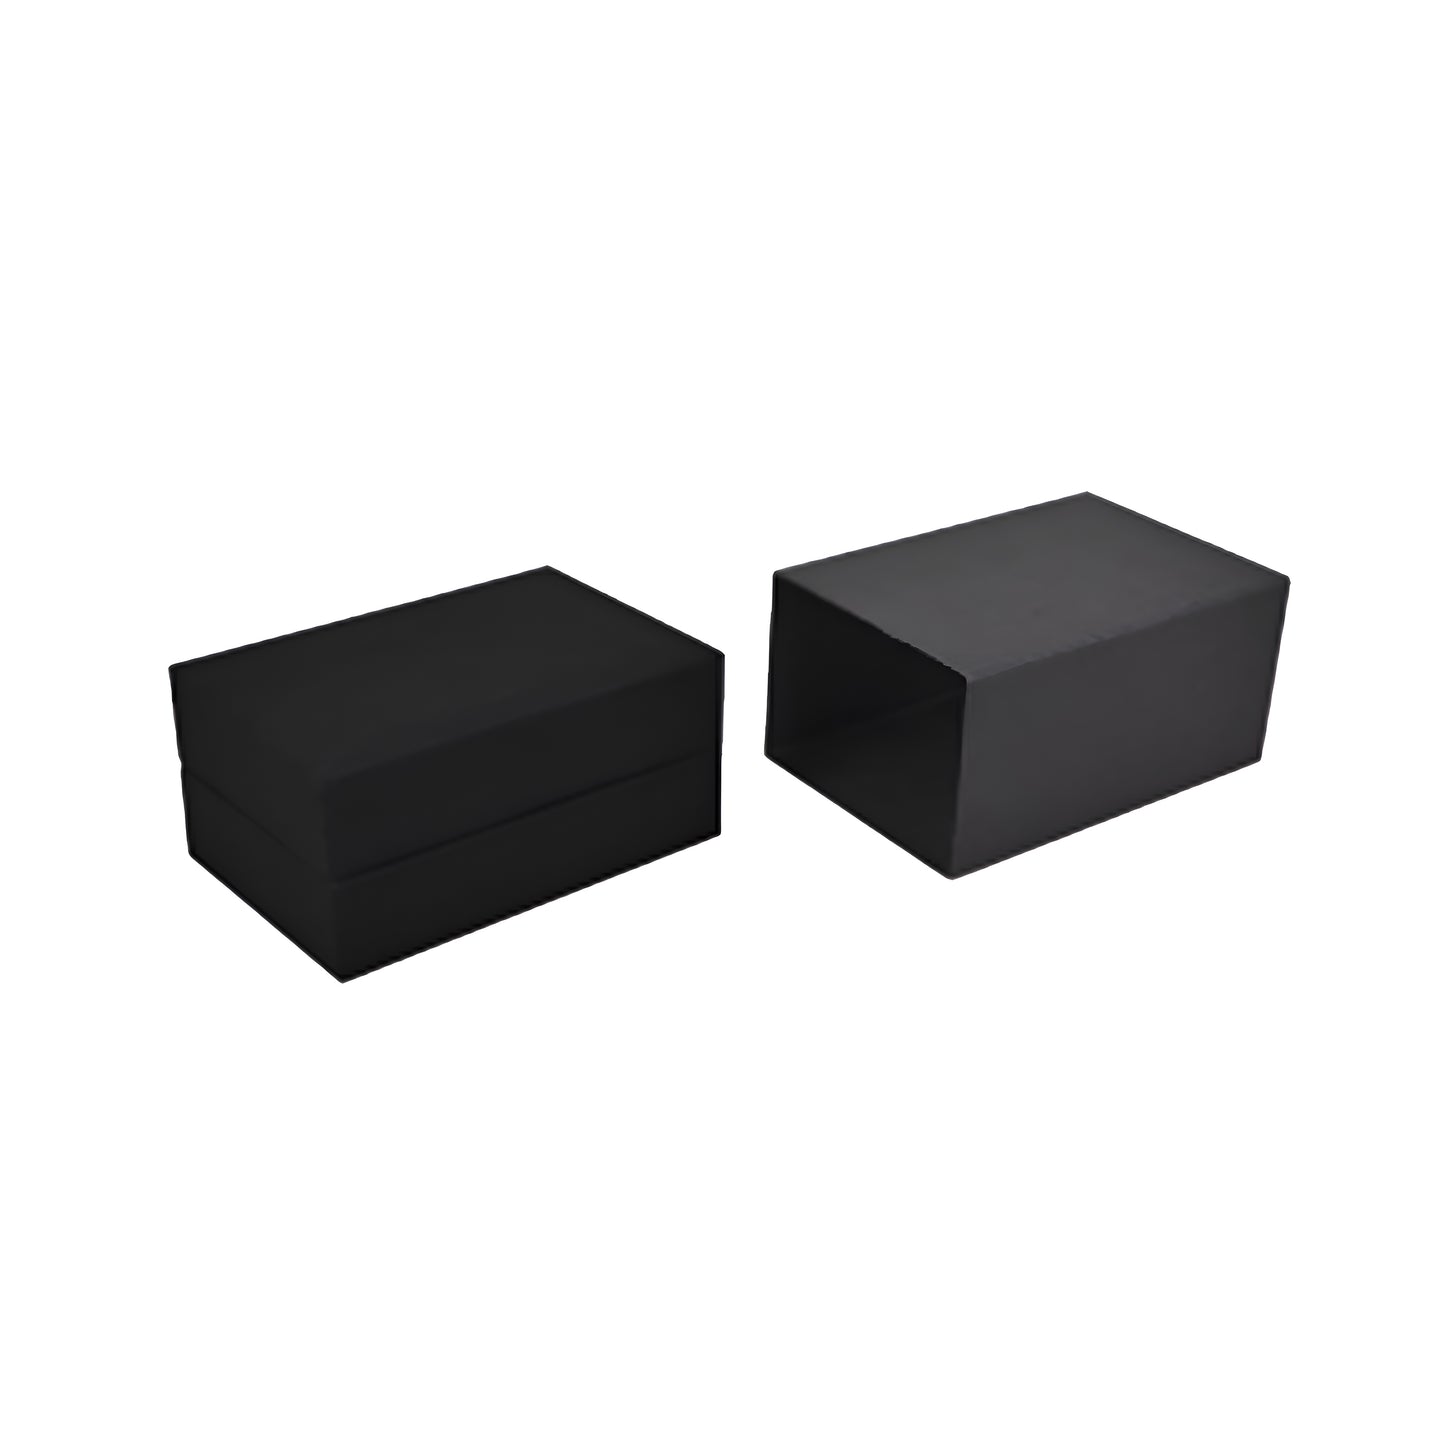 Oxford Cufflink Boxes (Pack of 12)